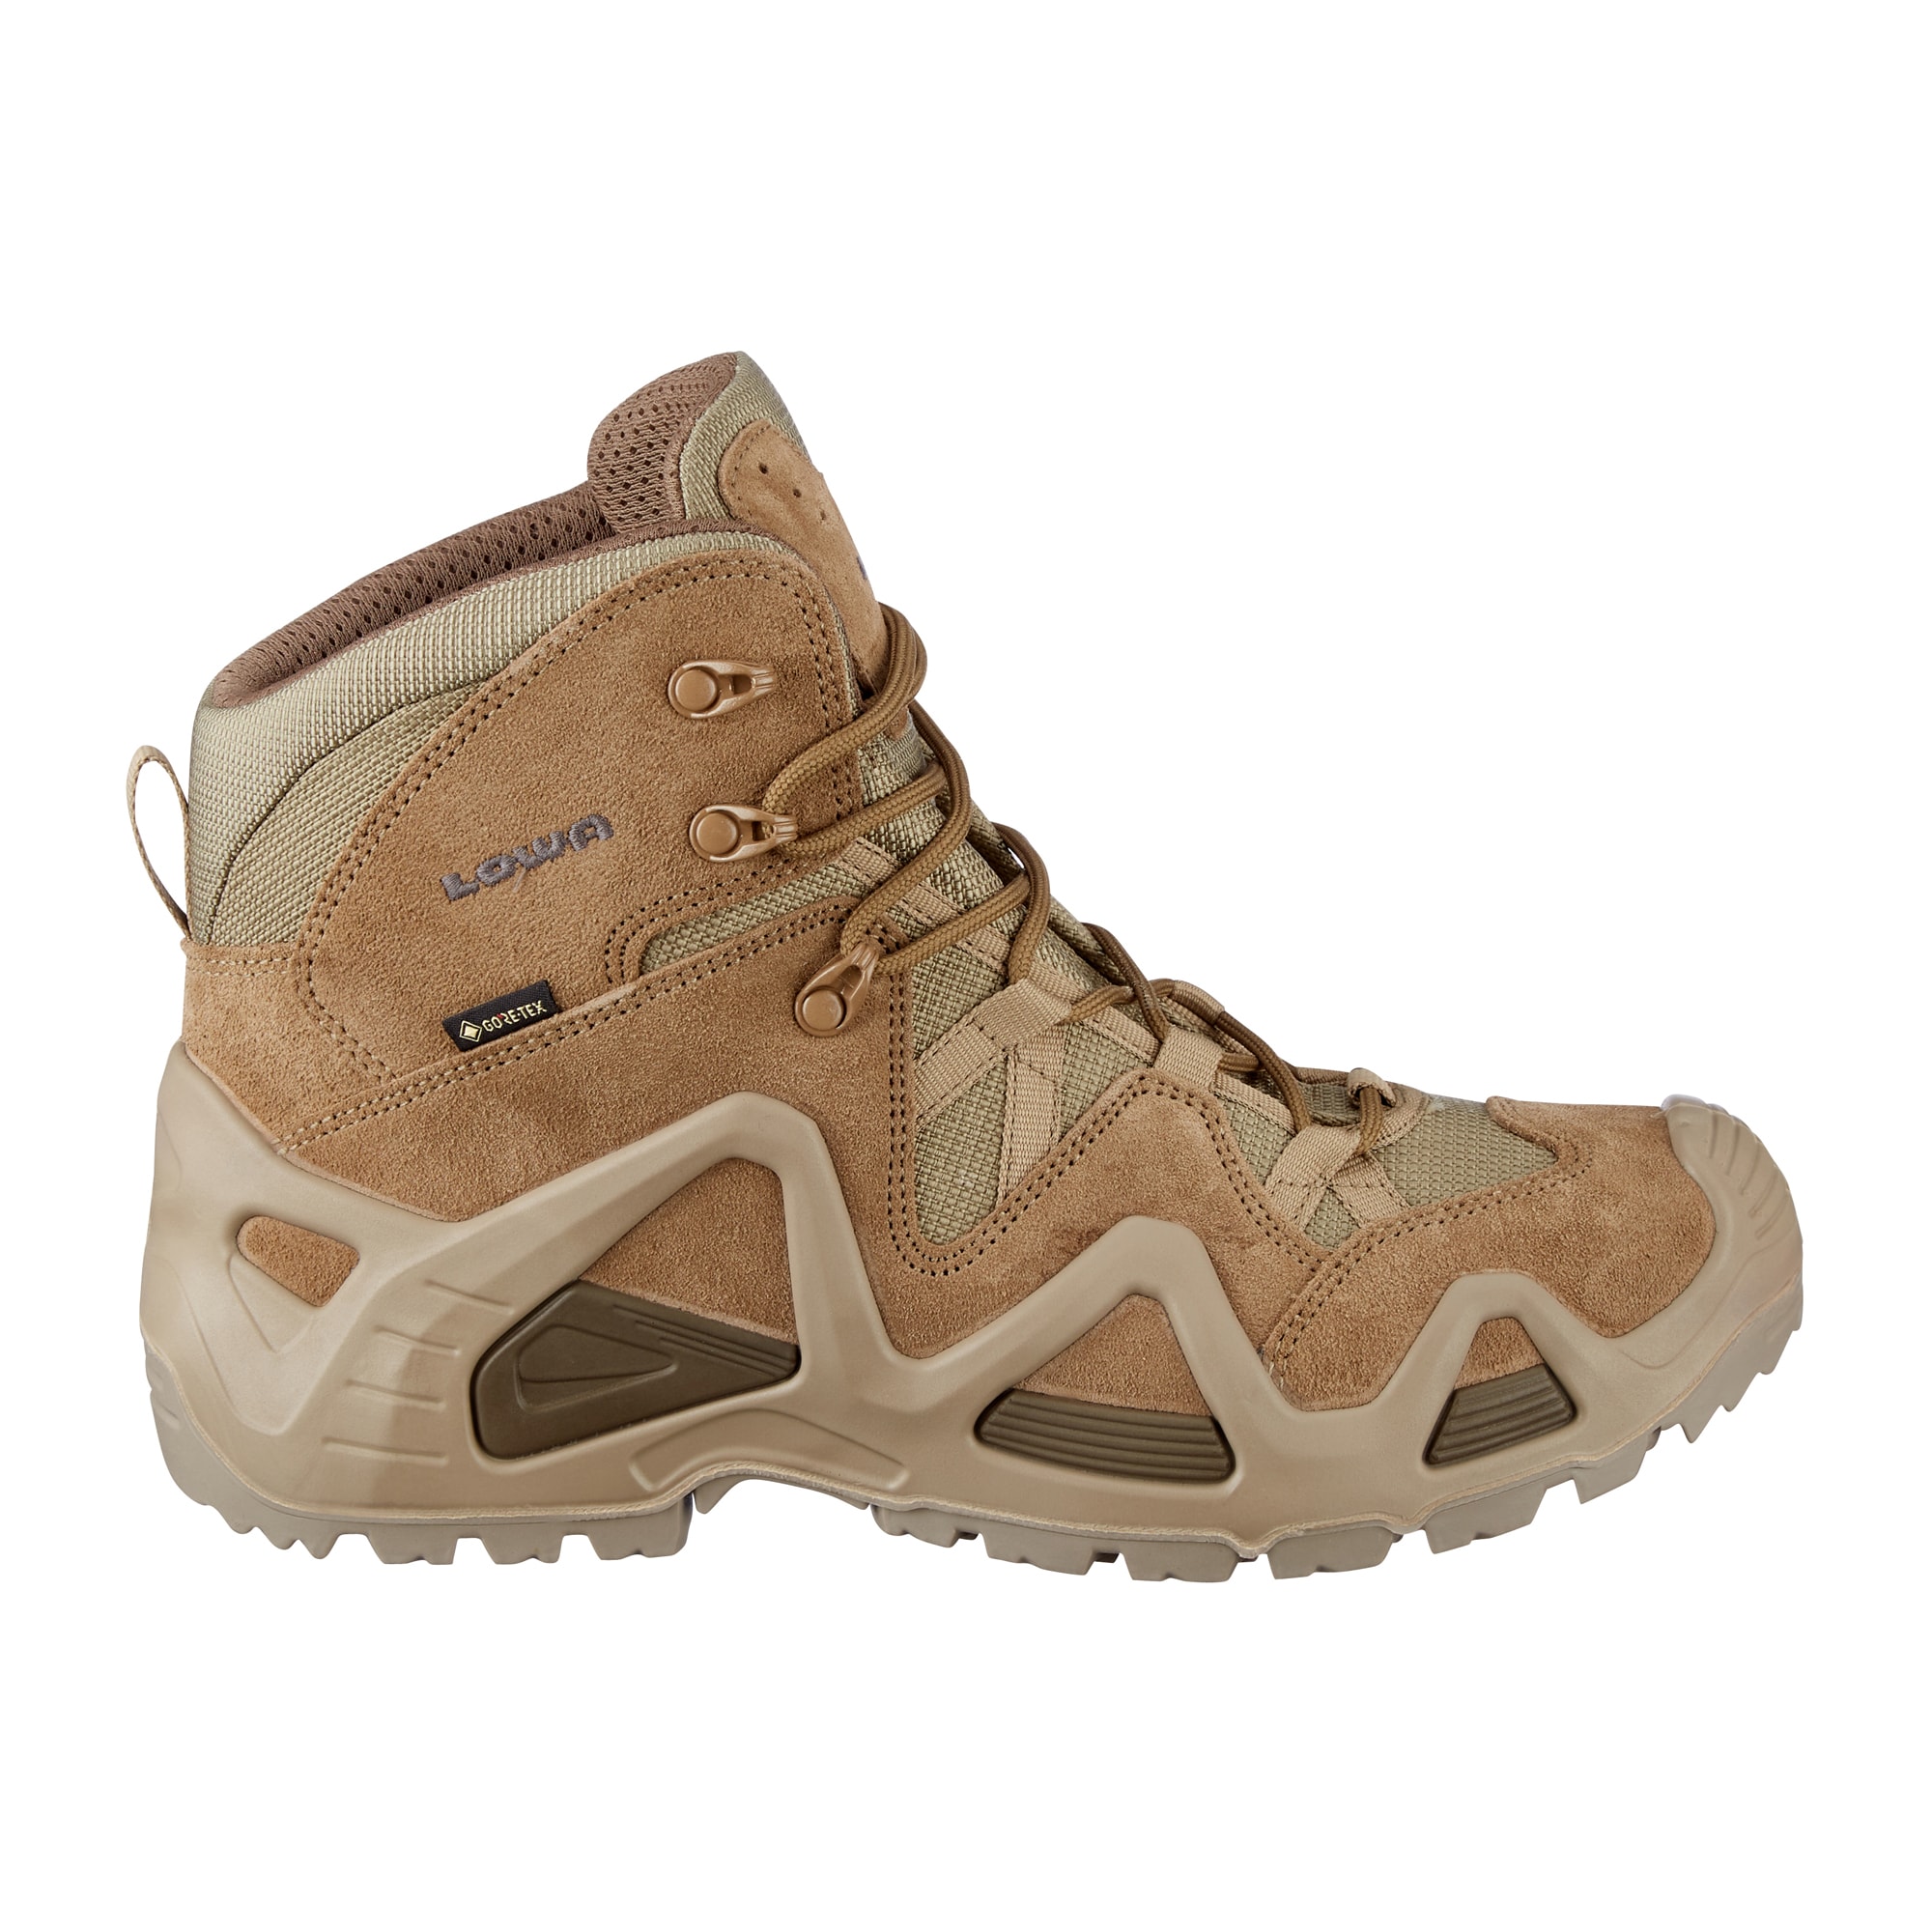 Purchase theLOWA Boots Zephyr GTX Mid TF coyote by ASMC